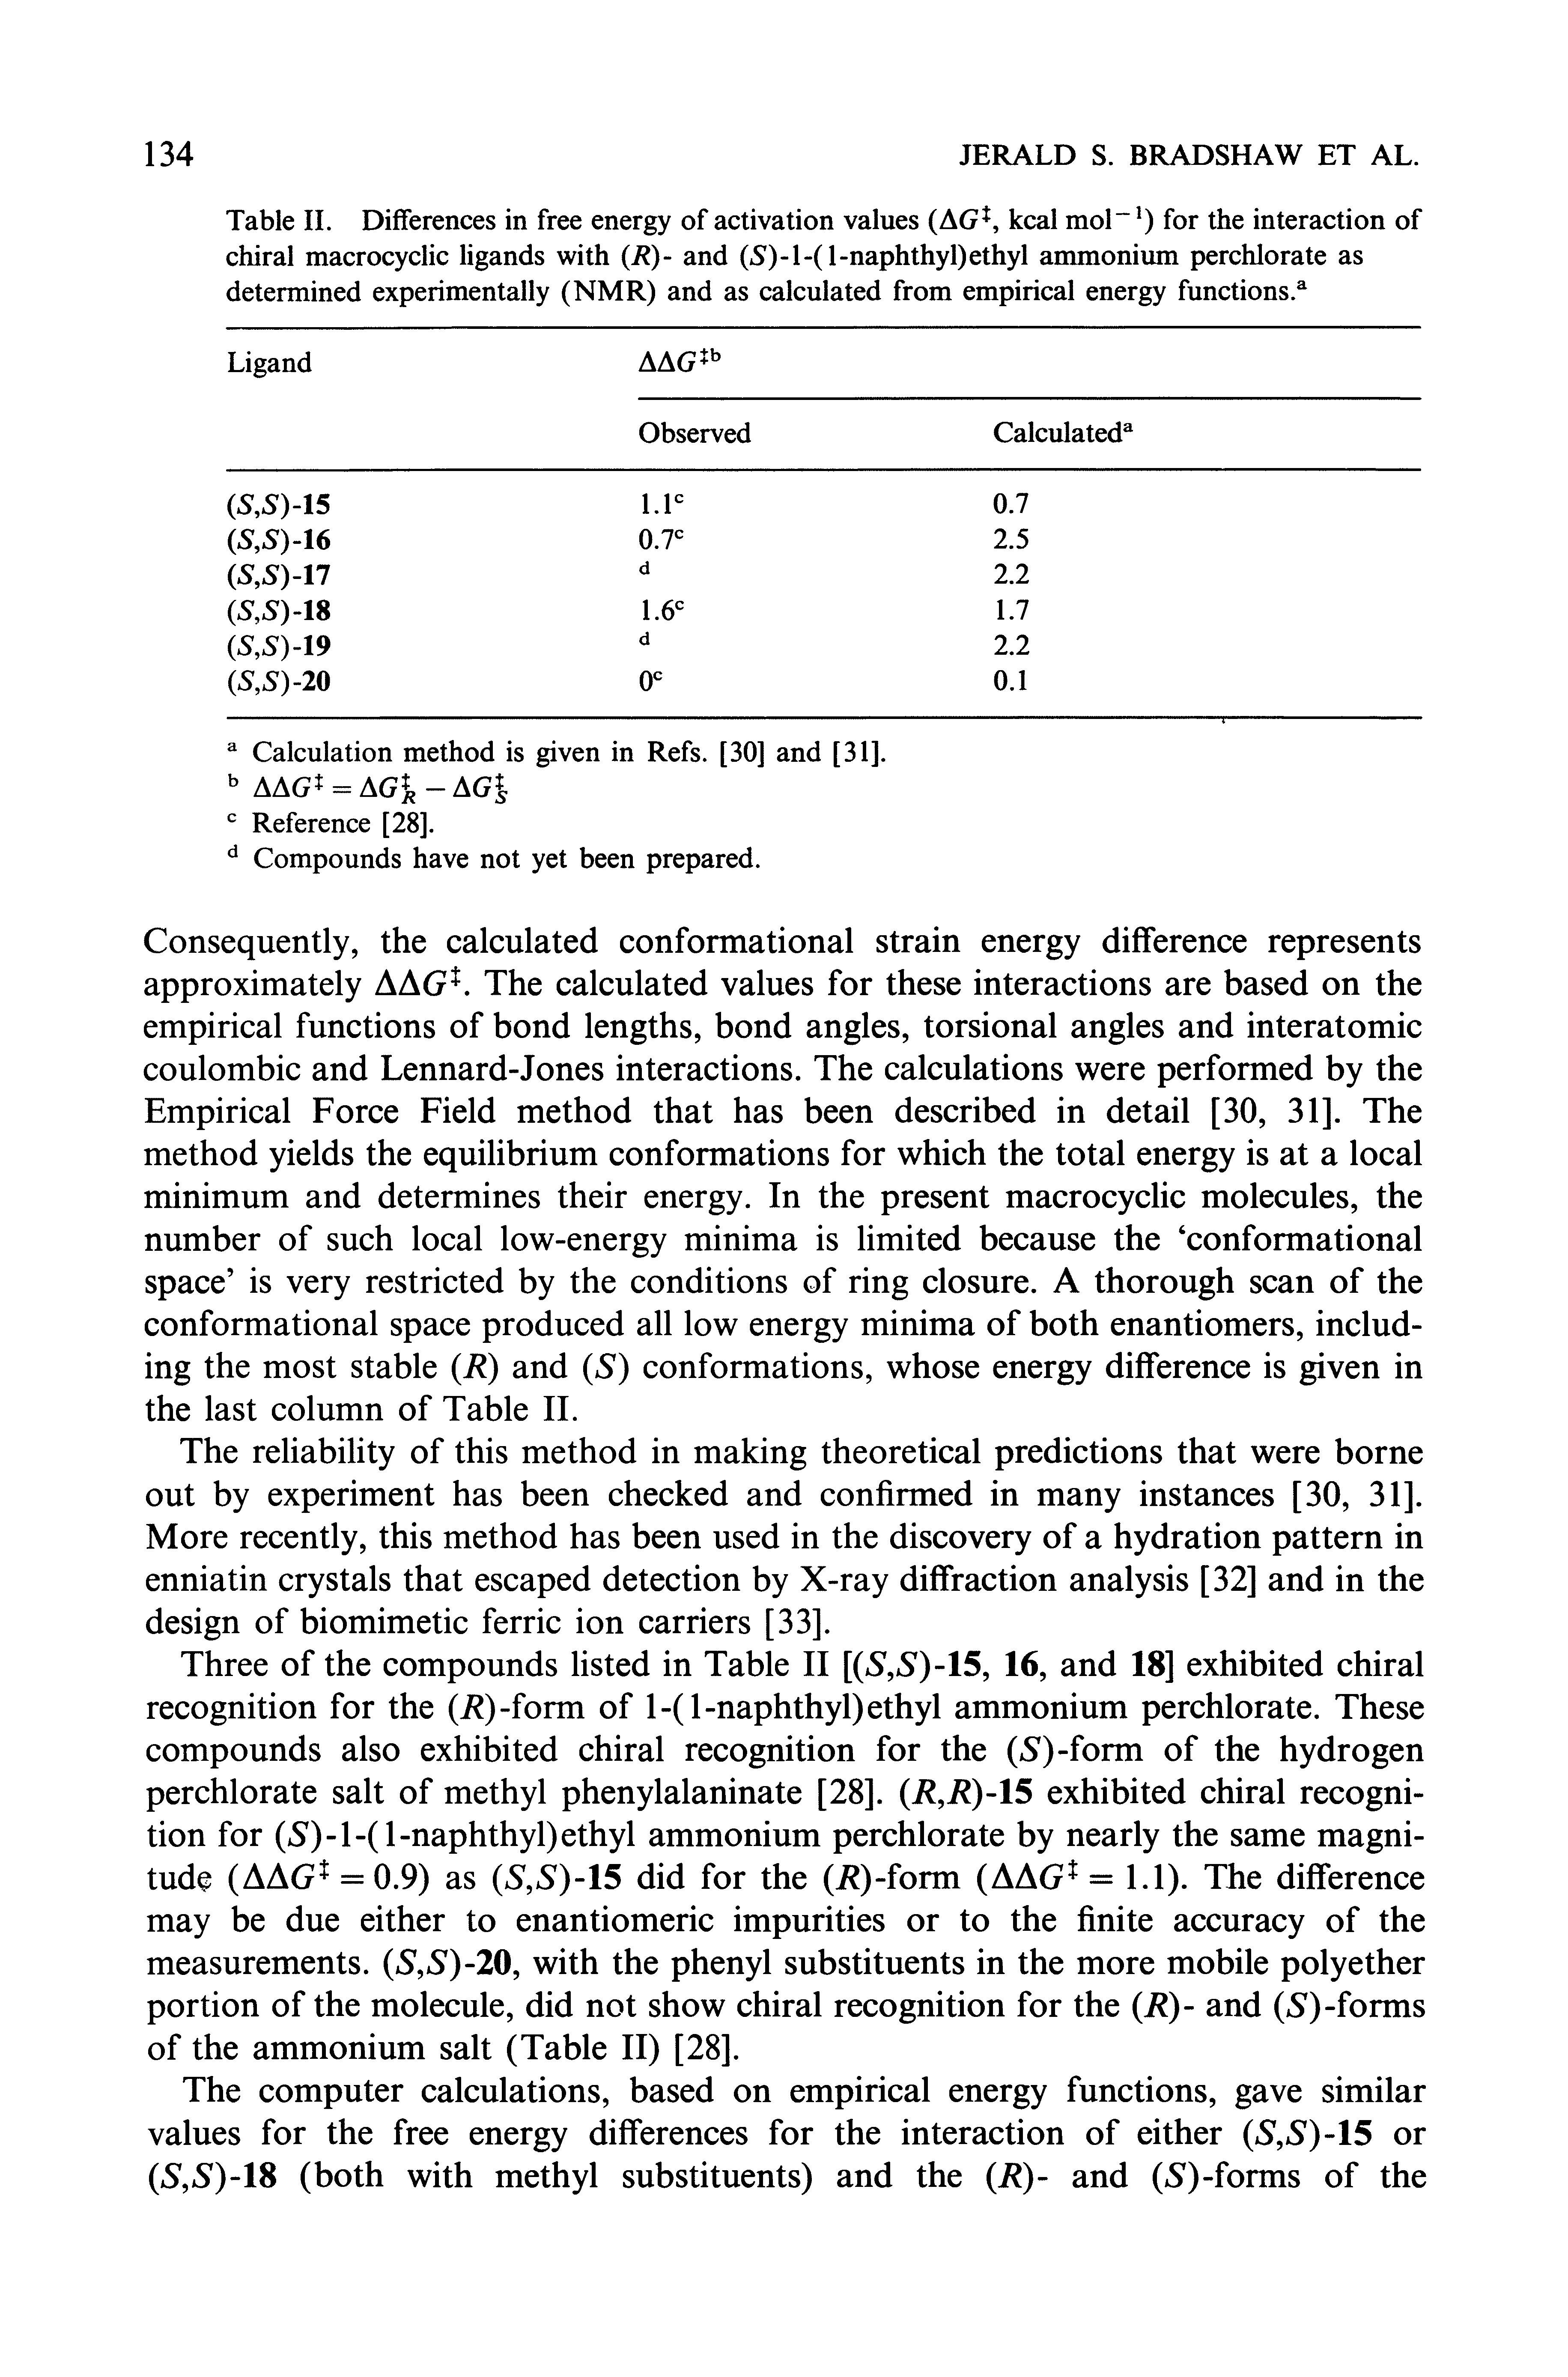 Table II. Differences in free energy of activation values (AG, kcal mol for the interaction of chiral macrocyclic ligands with (R)- and (5)-1-(1-naphthyl) ethyl ammonium perchlorate as determined experimentally (NMR) and as calculated from empirical energy functions. ...